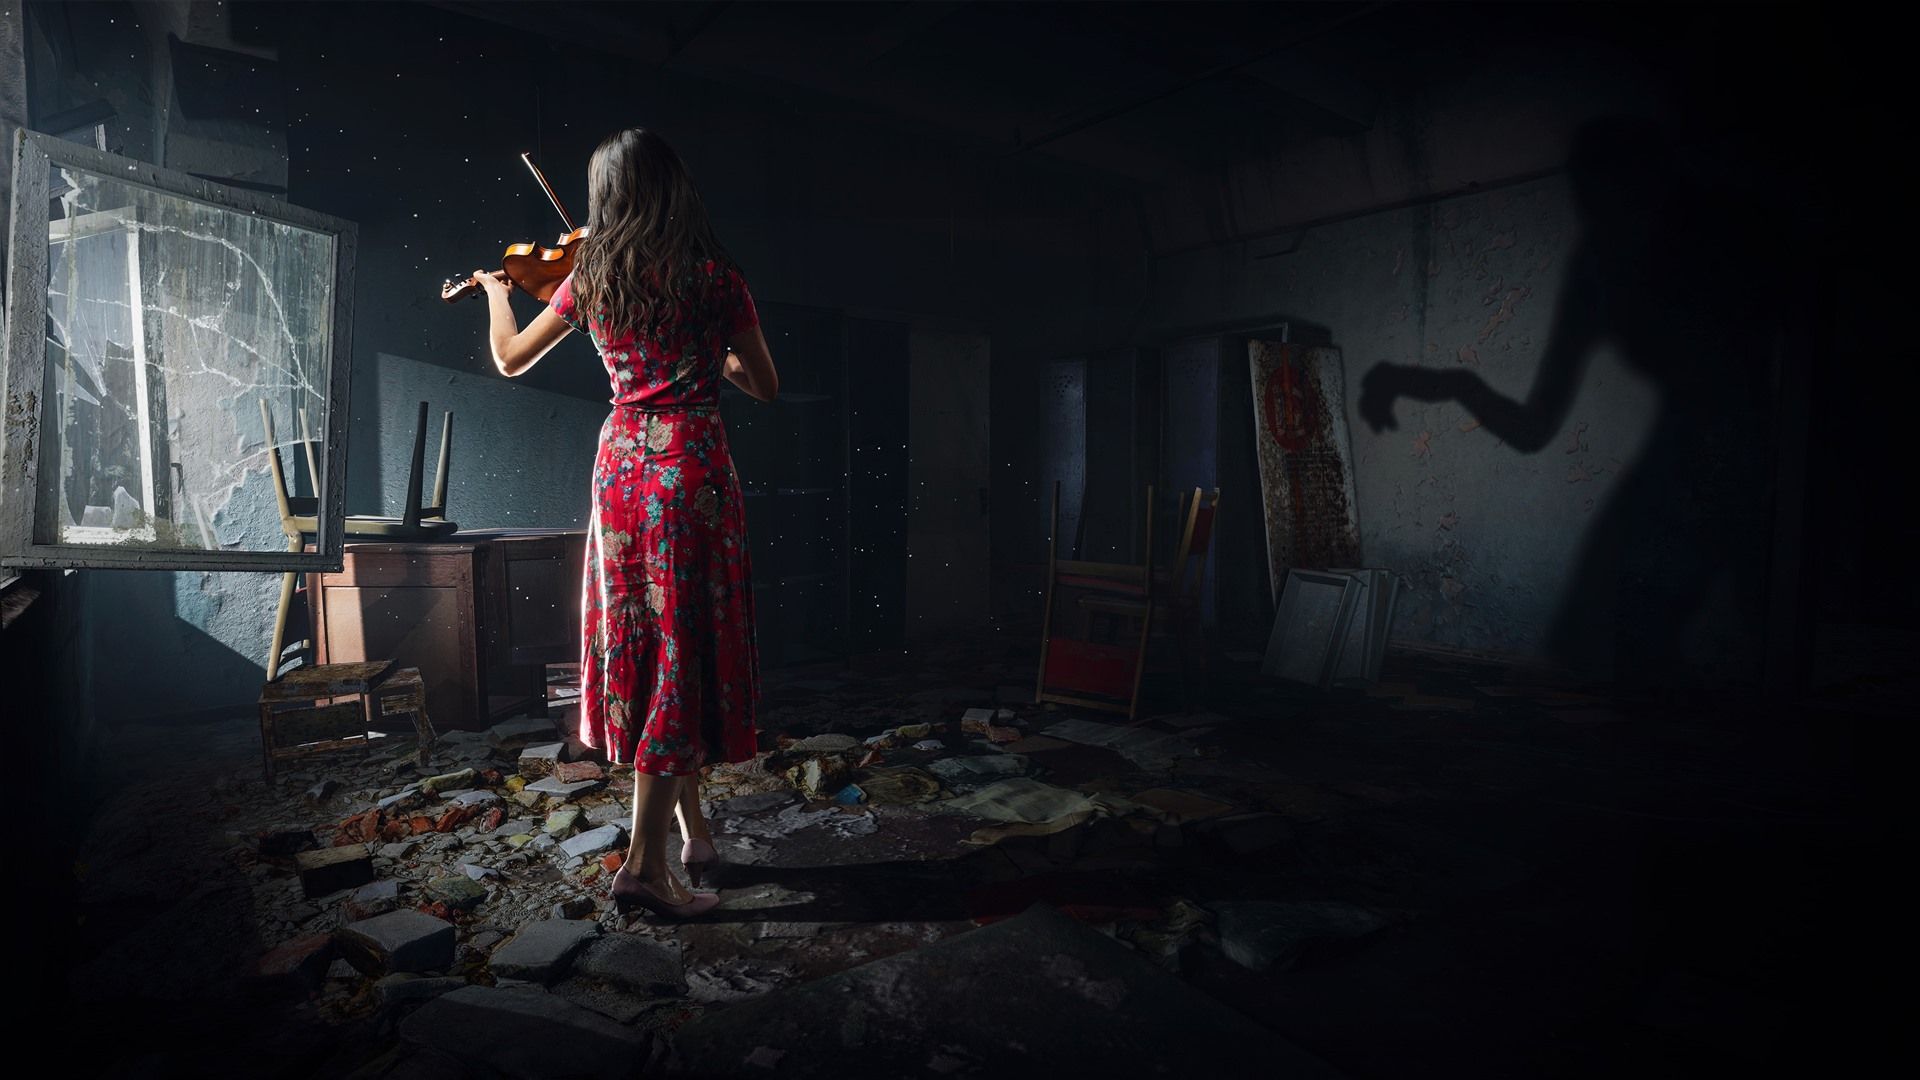 Wallpapers Chernobylite 2019, PC game, girl, back view, violin 3840x2160 UHD 4K Picture, Image